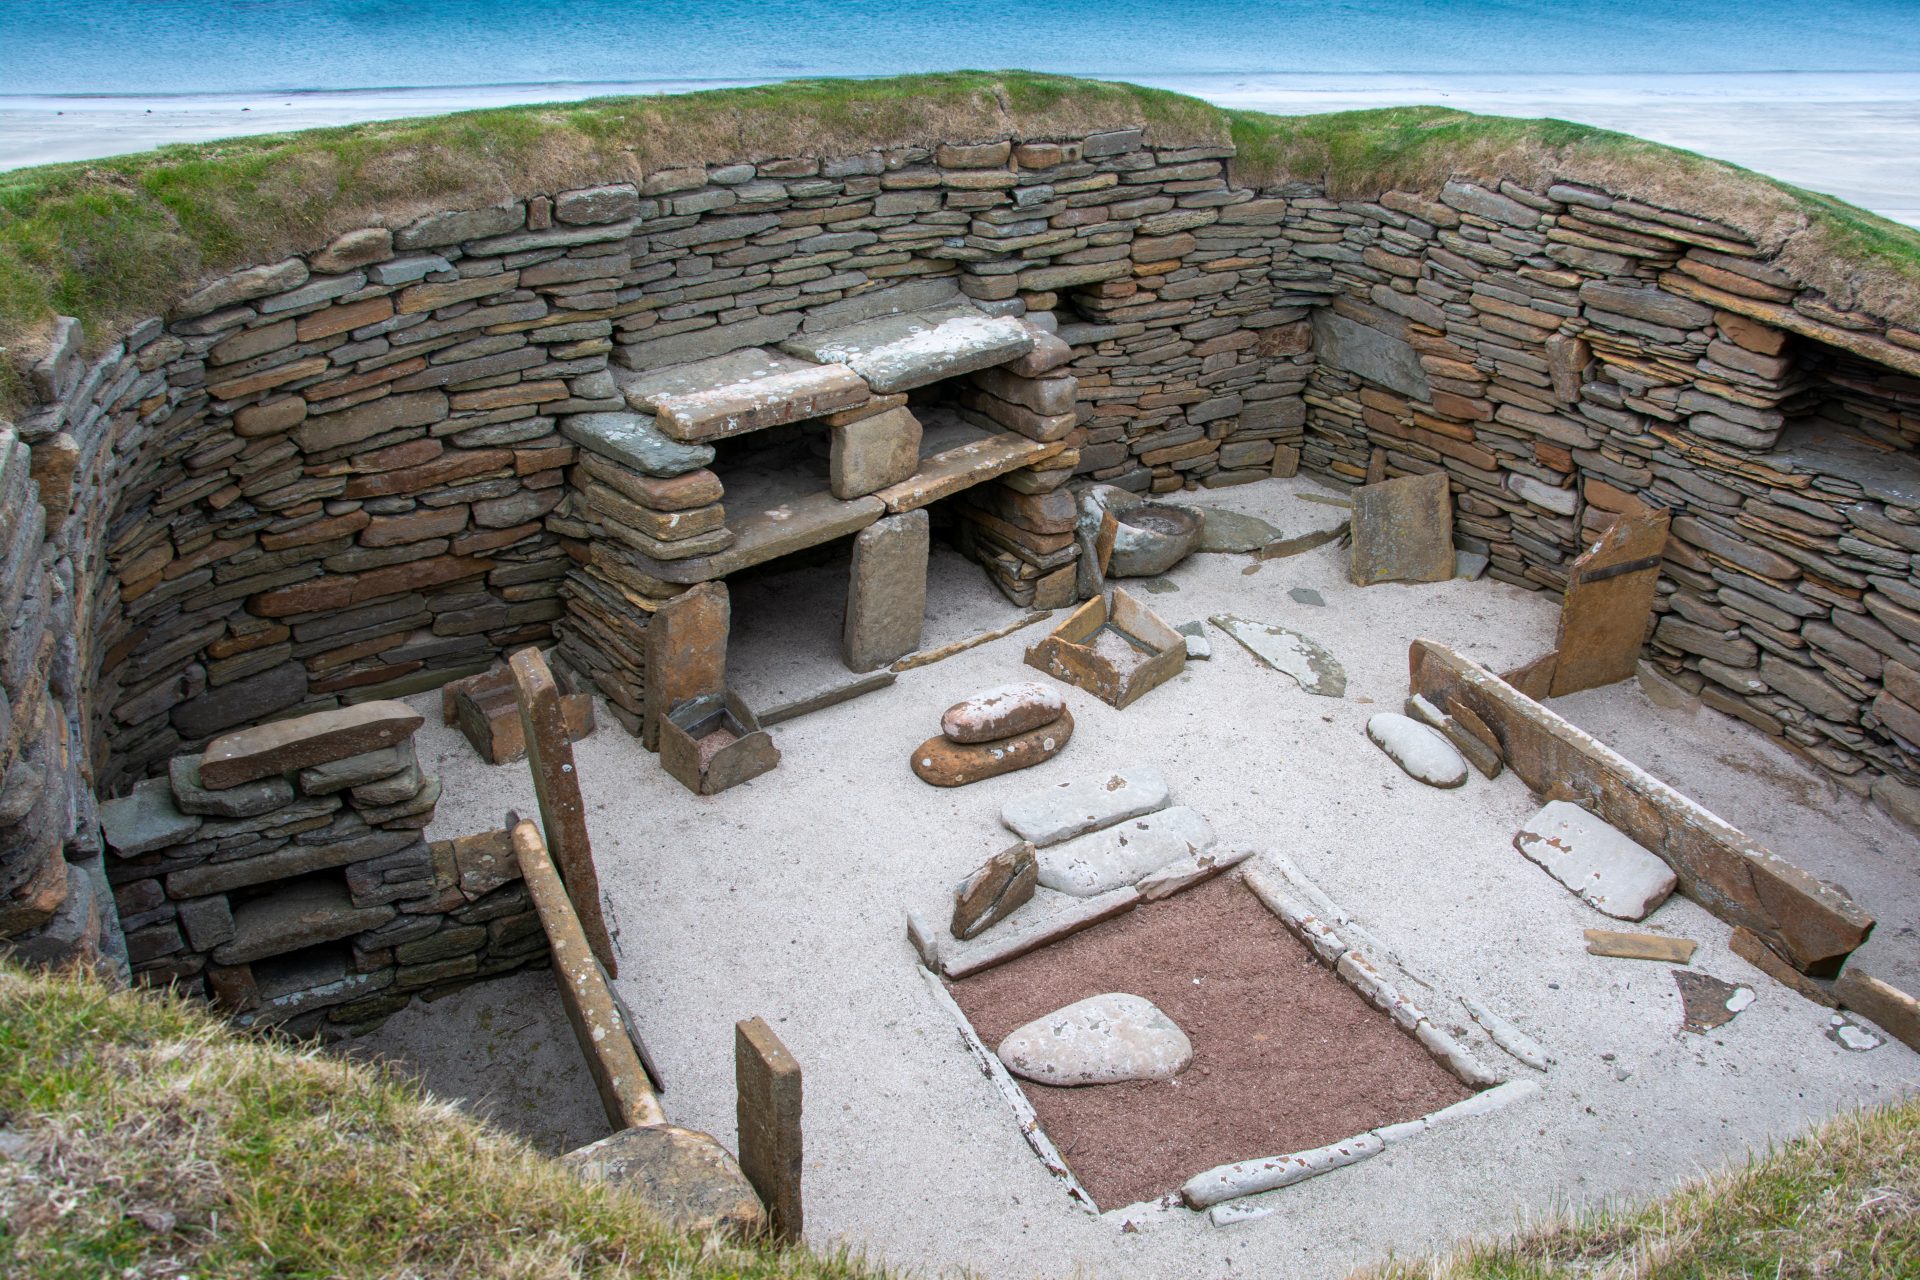 A well-preserved Neolithic village